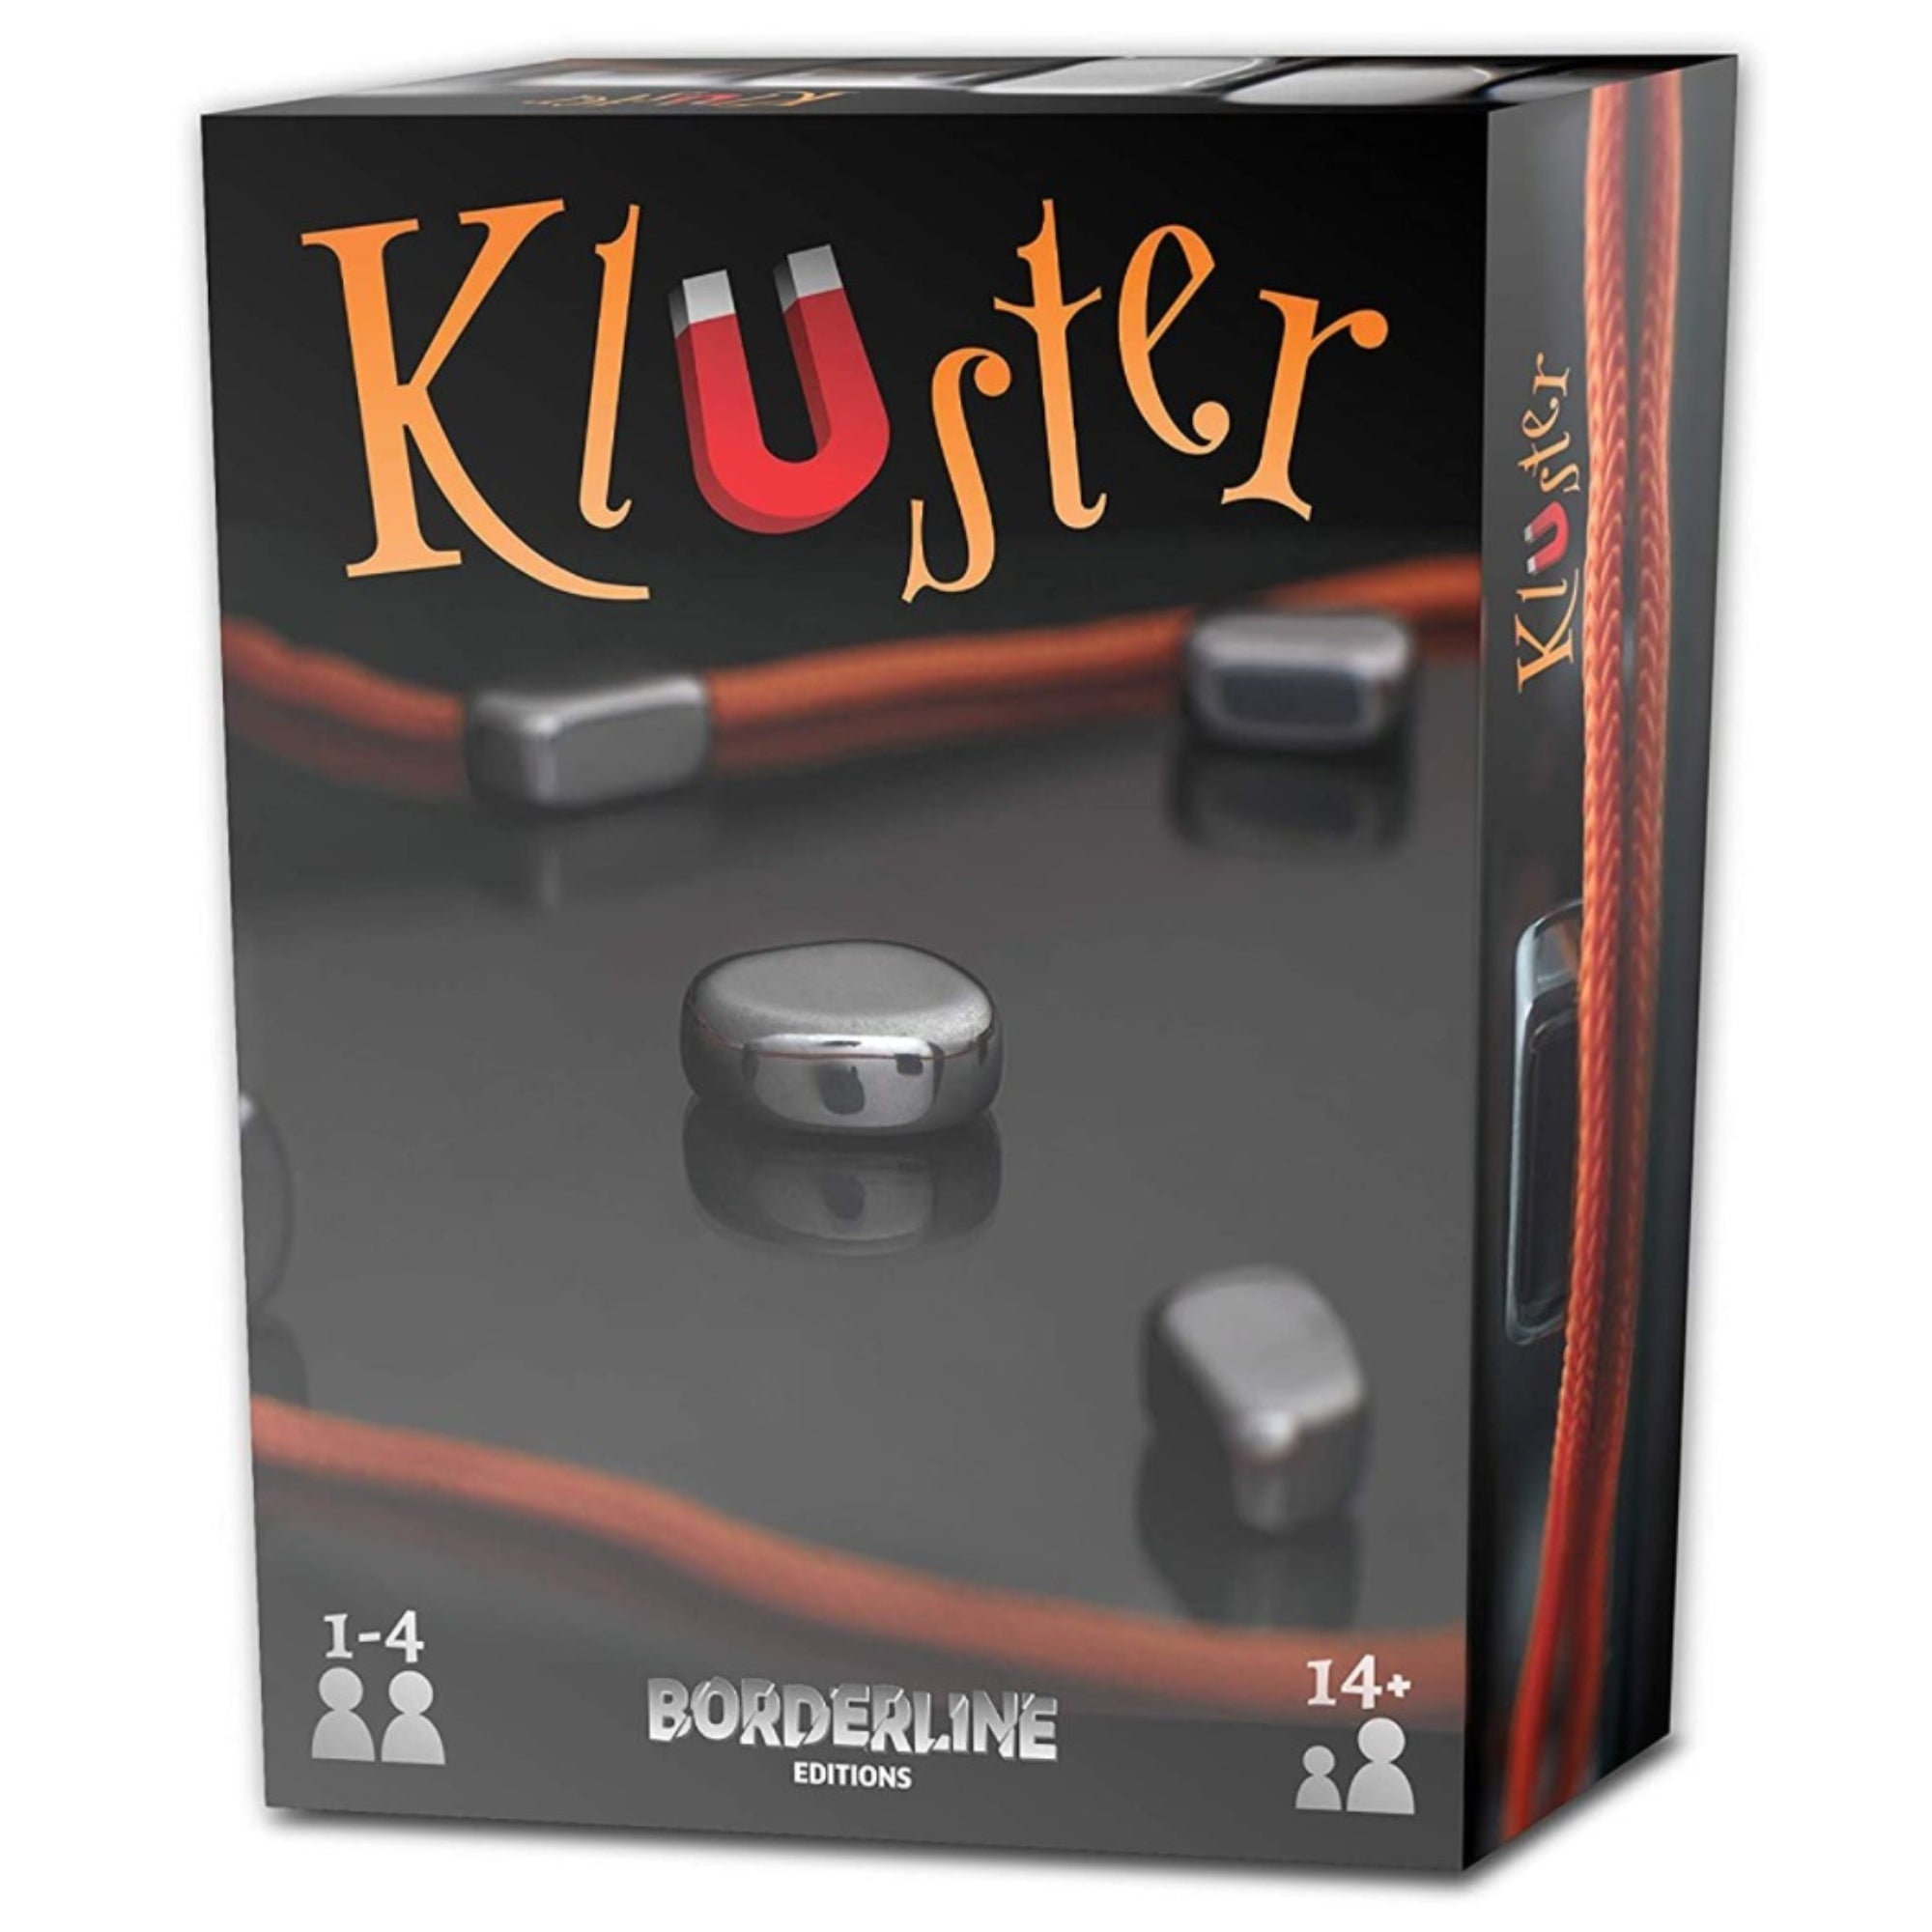 Kluster front of box